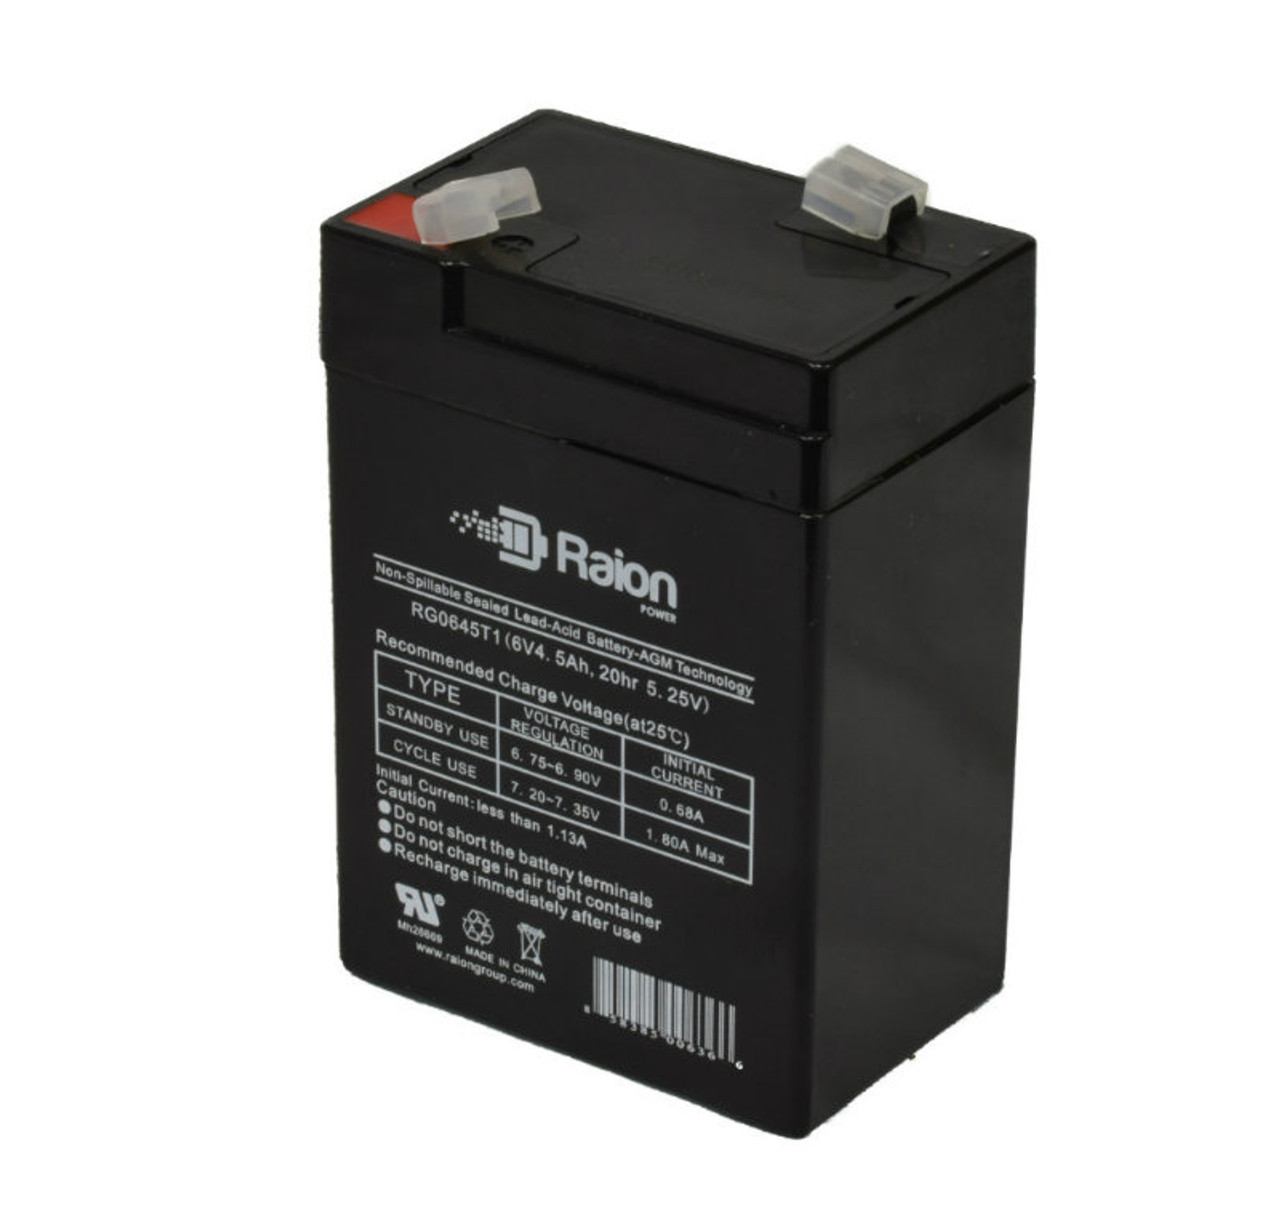 Raion Power RG0645T1 6V 4.5Ah Replacement Battery Cartridge for Zeus PC4.5-6XBF1